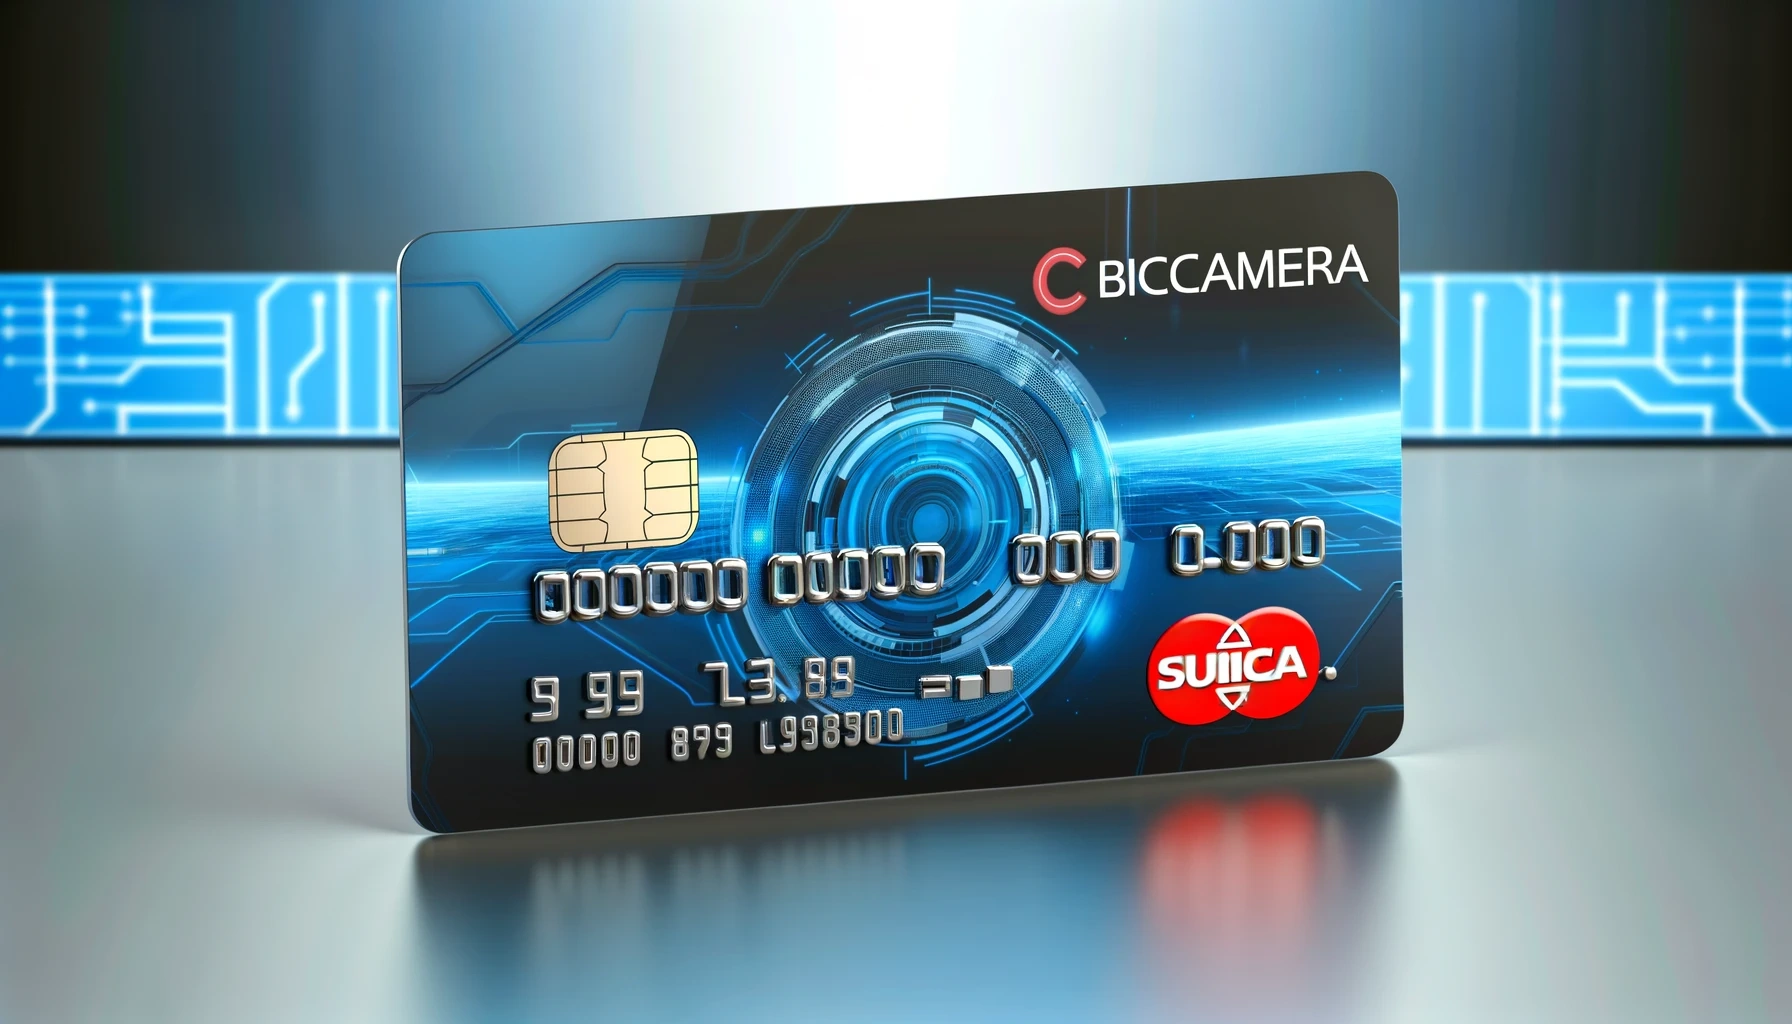 Applying for BicCamera Suica Card: Learn the Step-by-Step